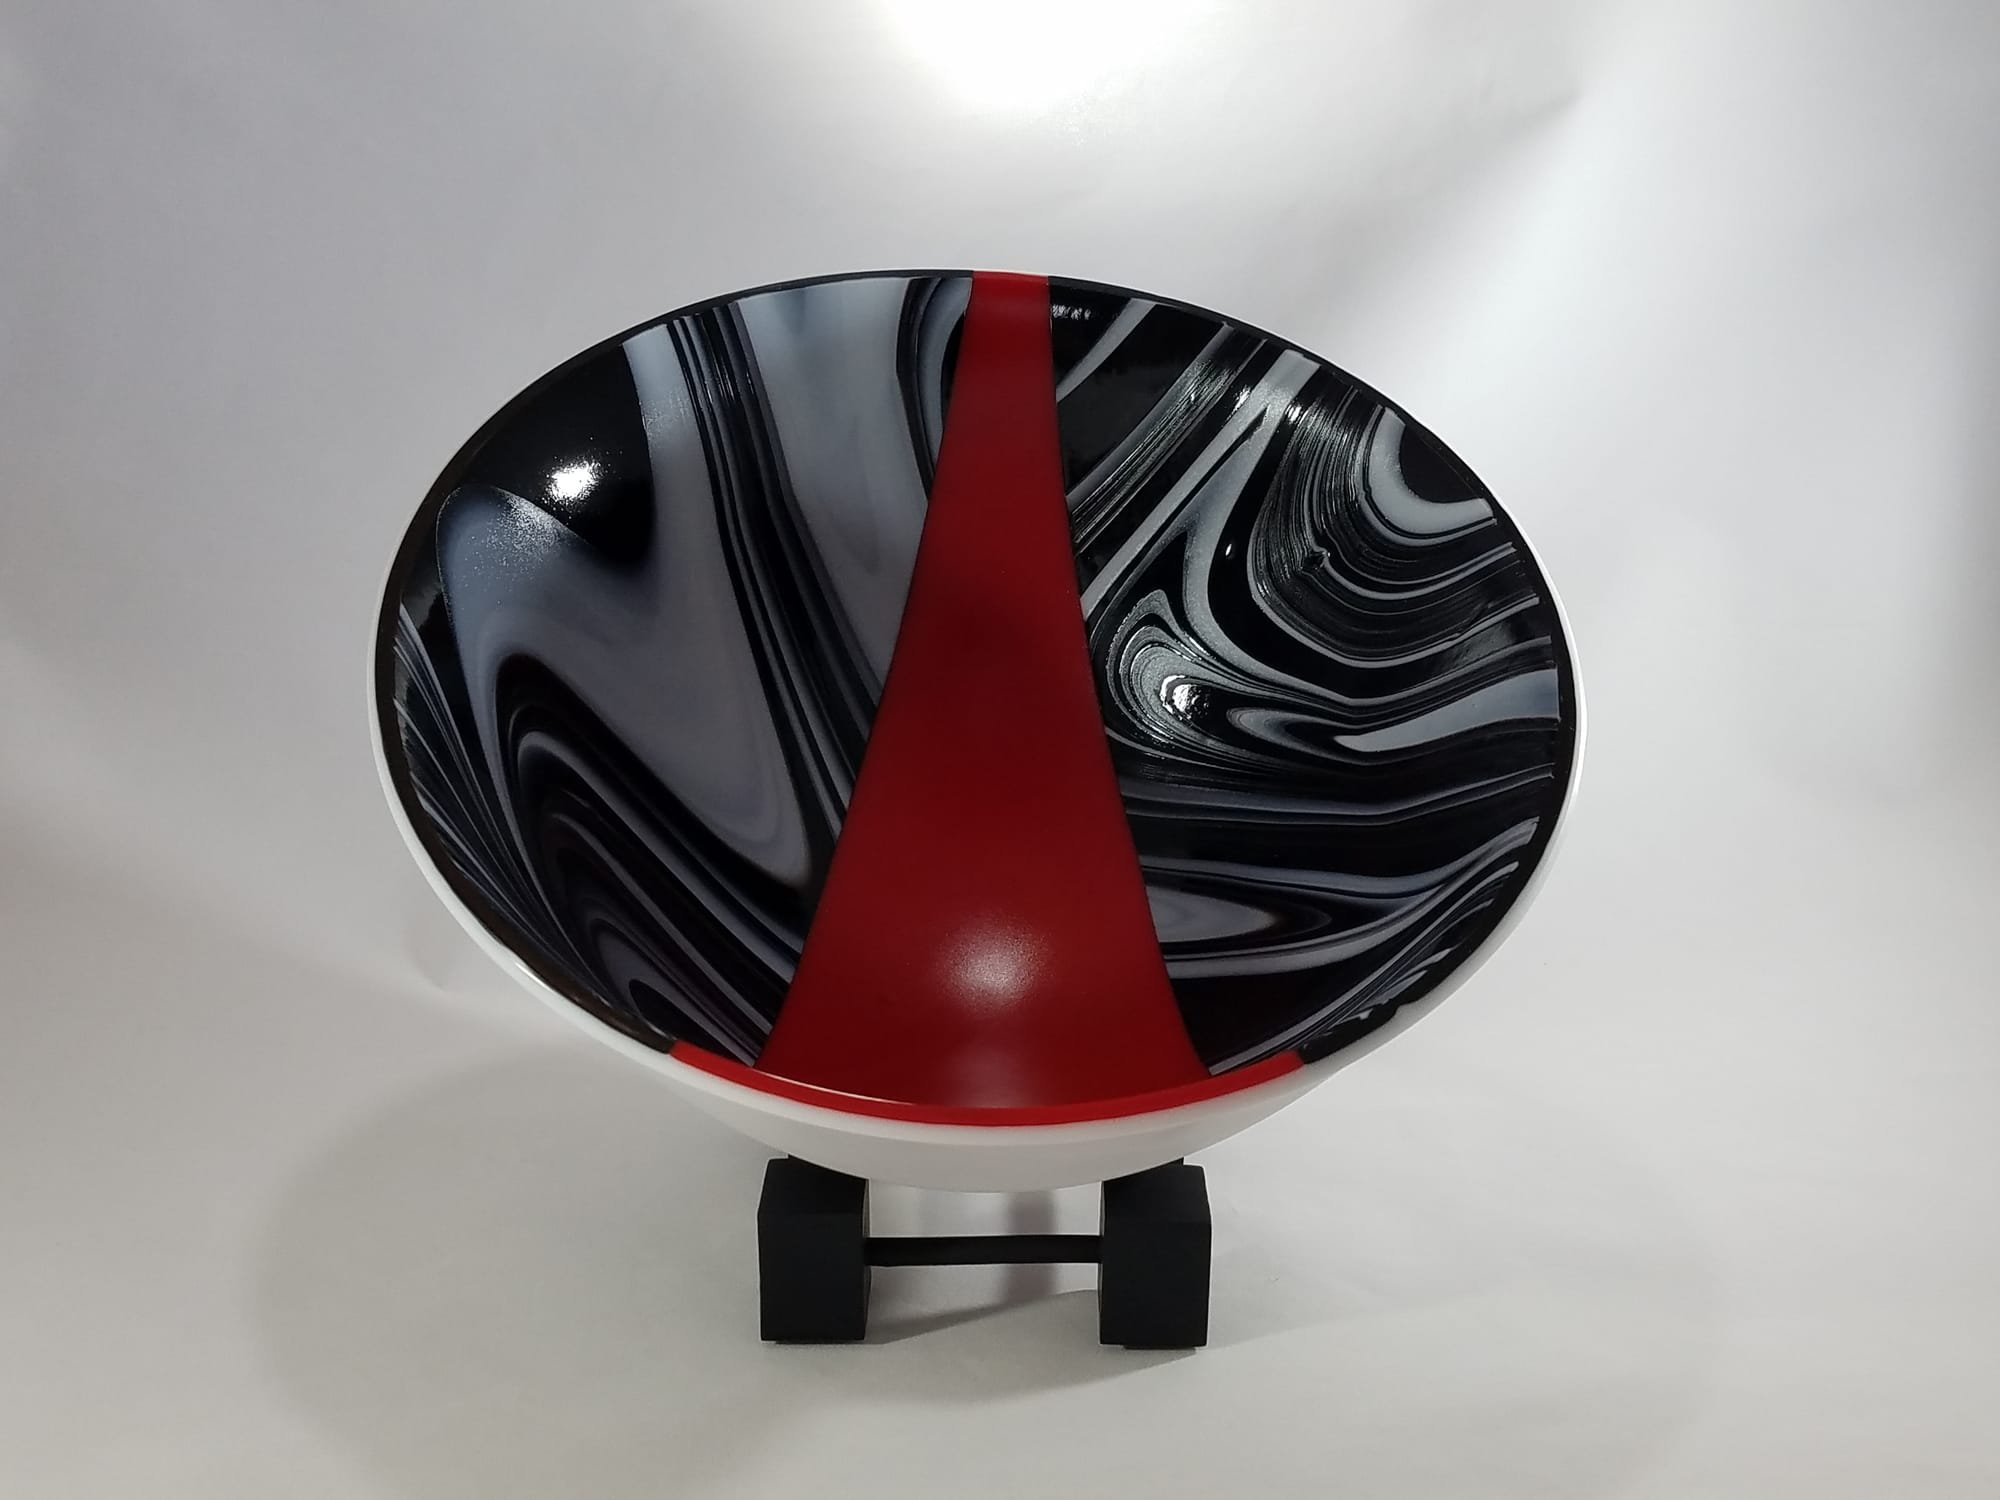 White Black Red Bowl on stand